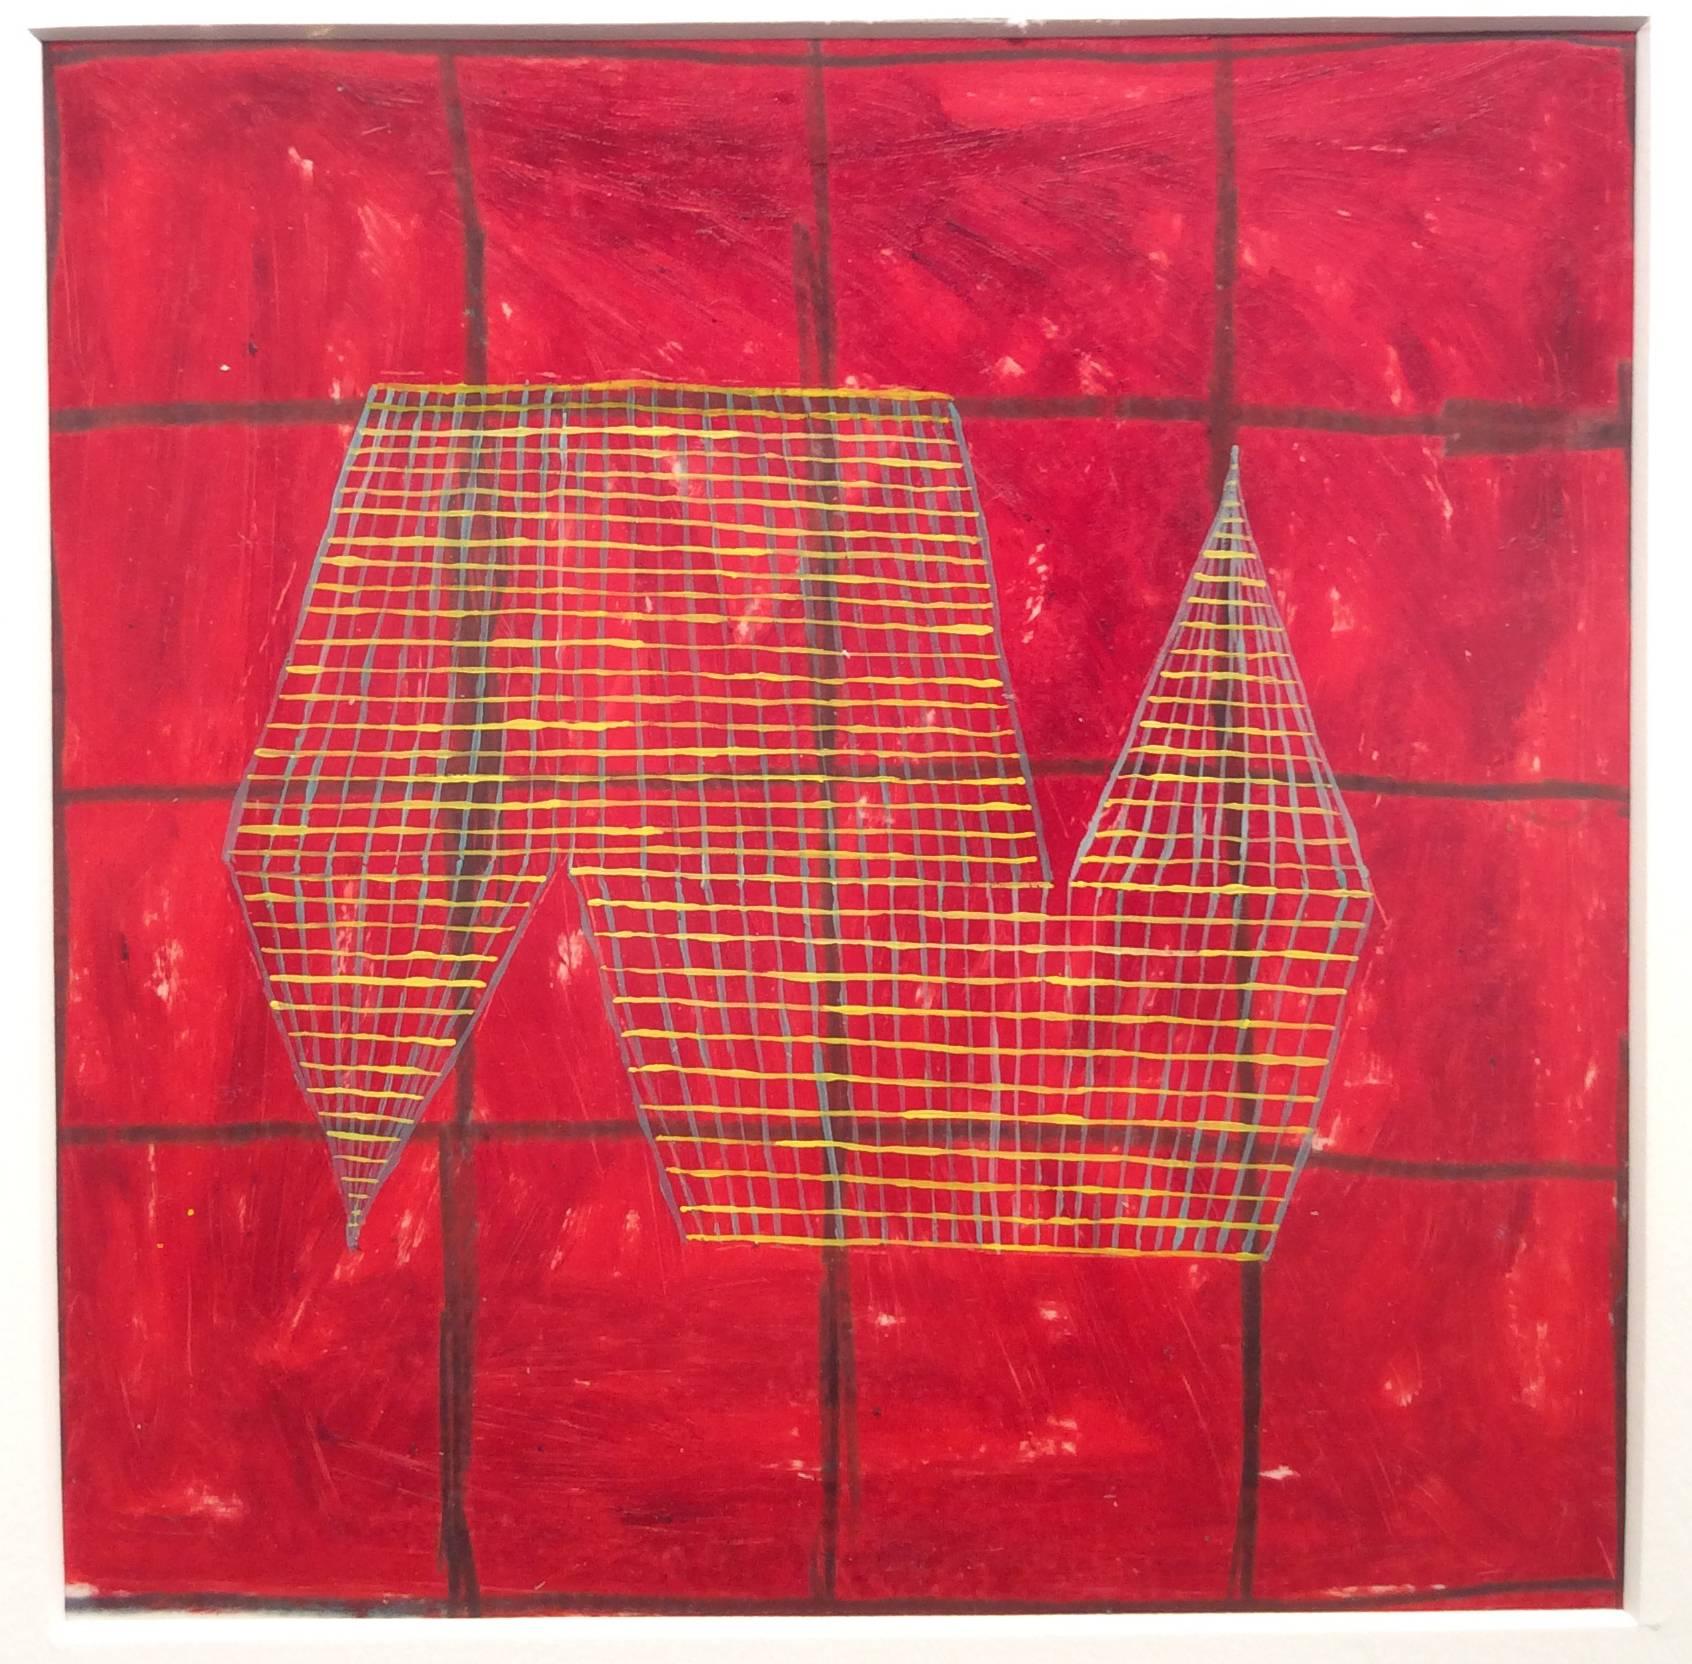 7A (Modern, Abstract Red & Yellow Grid Painting on Vellum in Square White Frame)